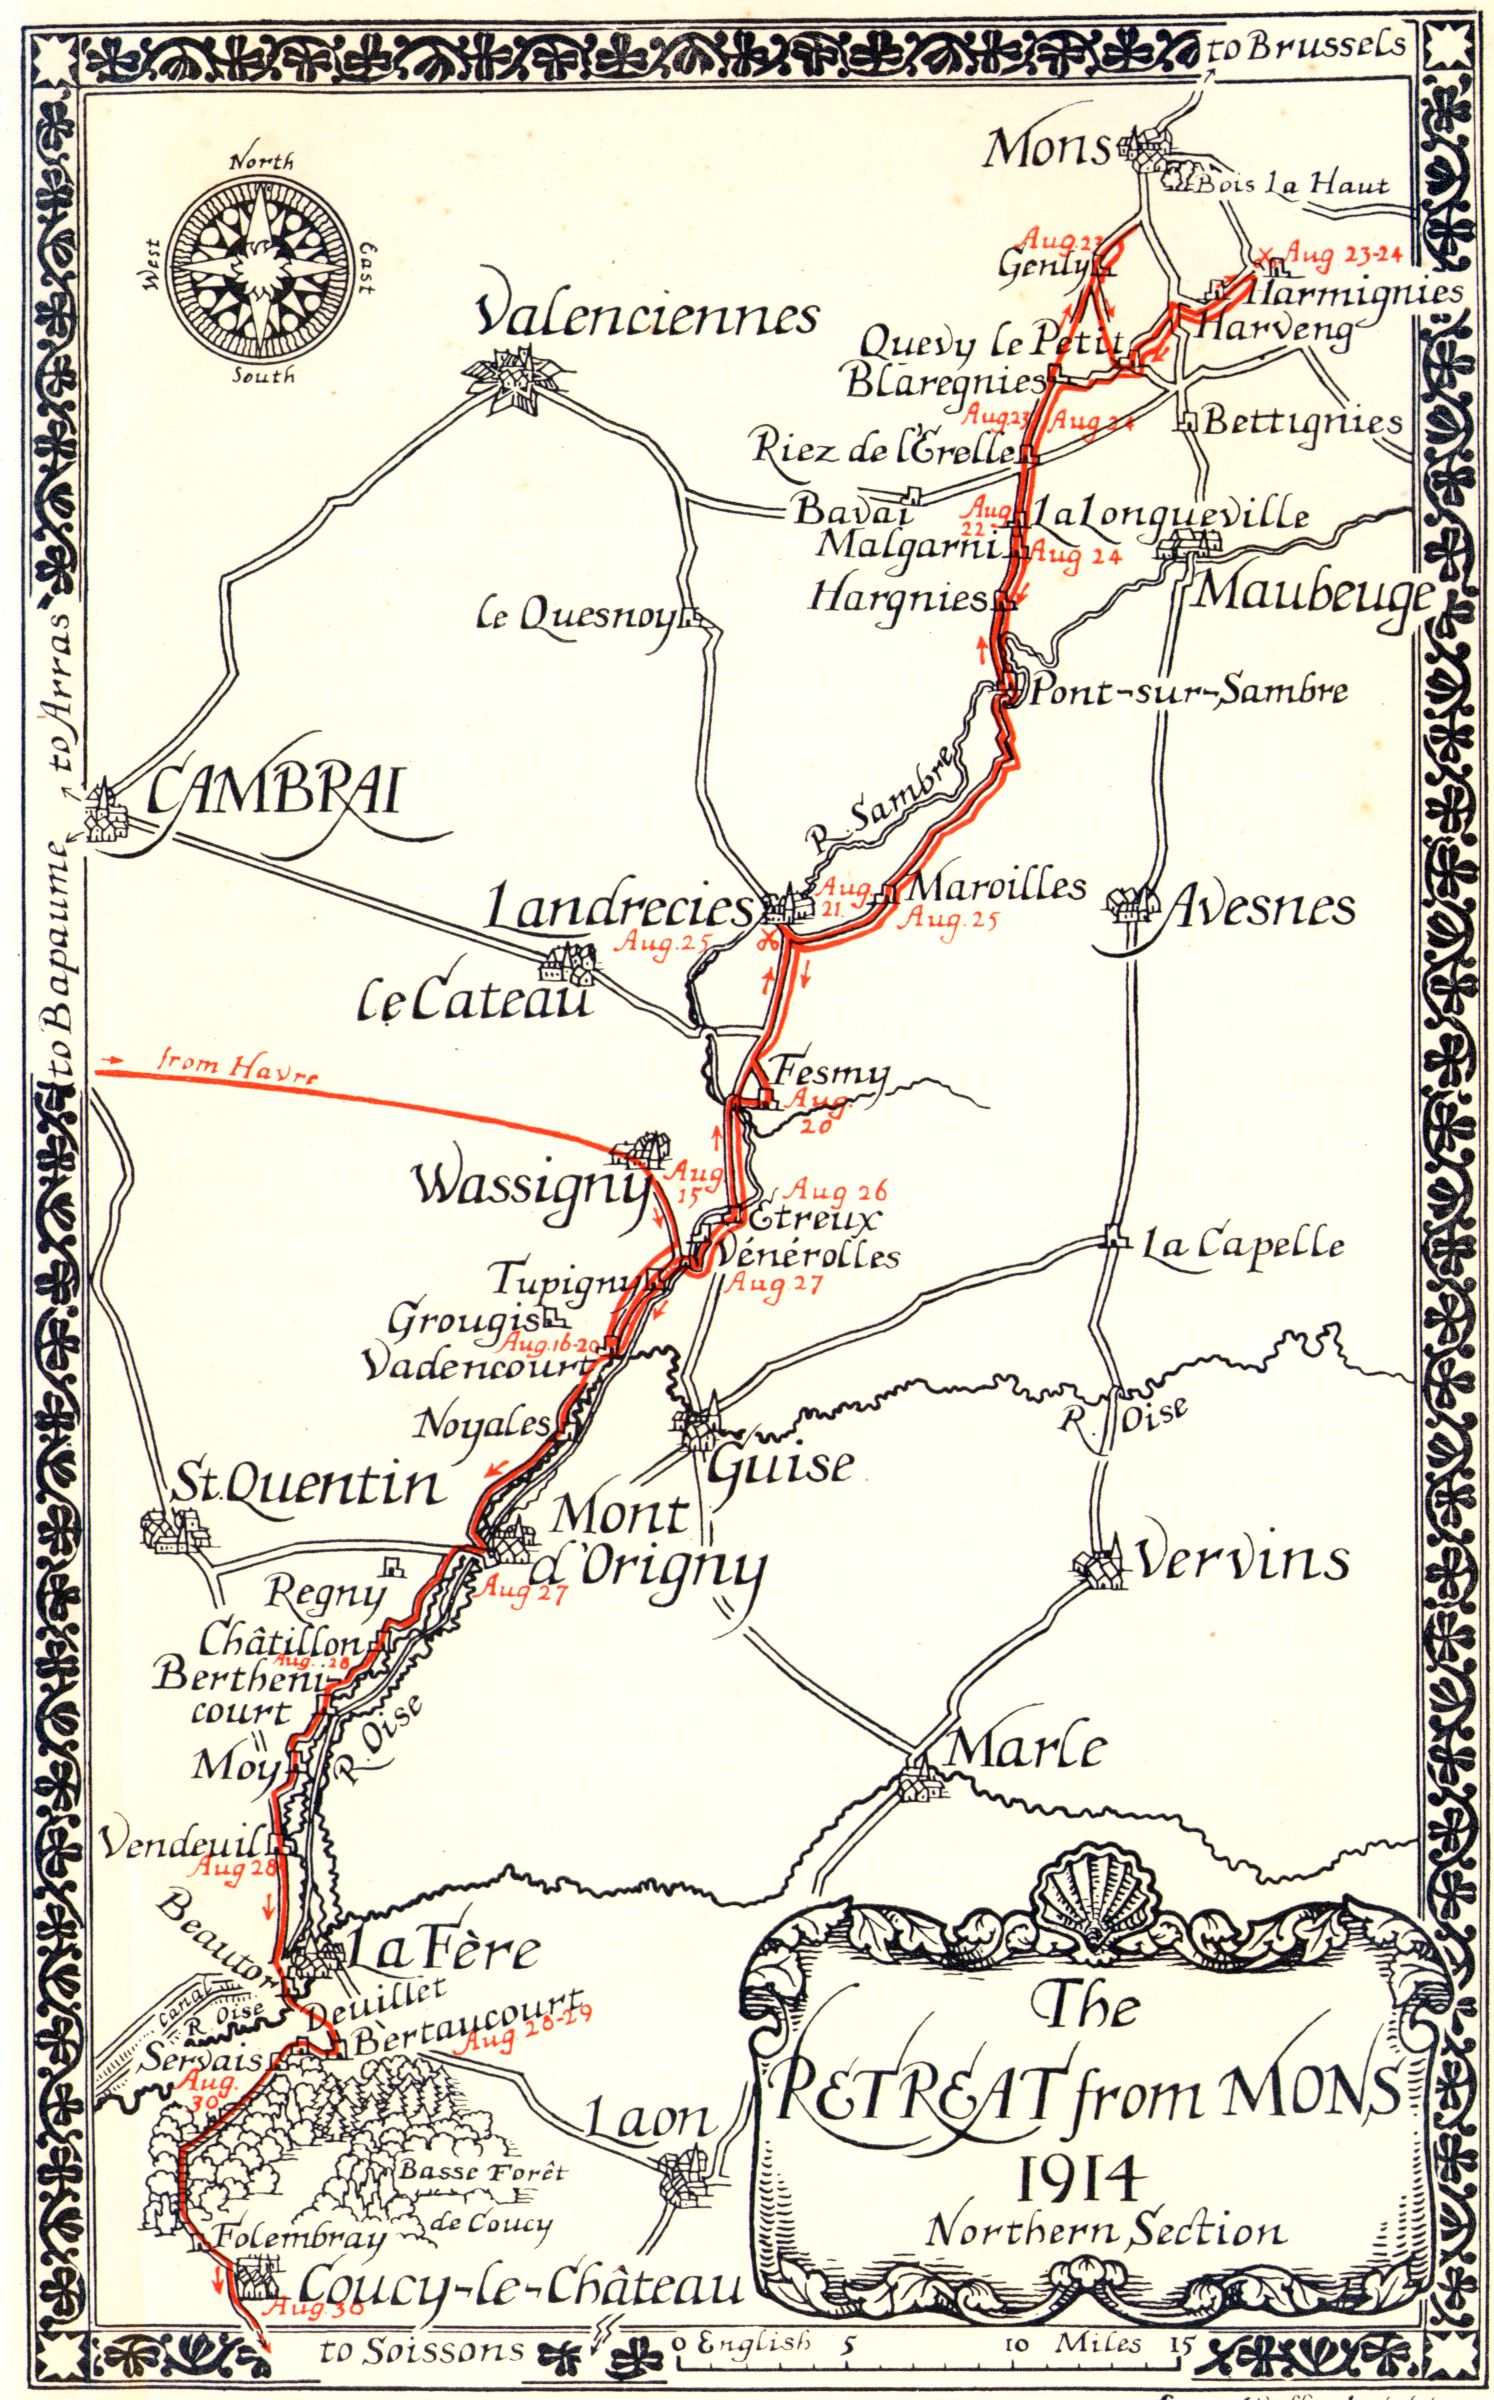 The Retreat from Mons, 1914. Northern Section